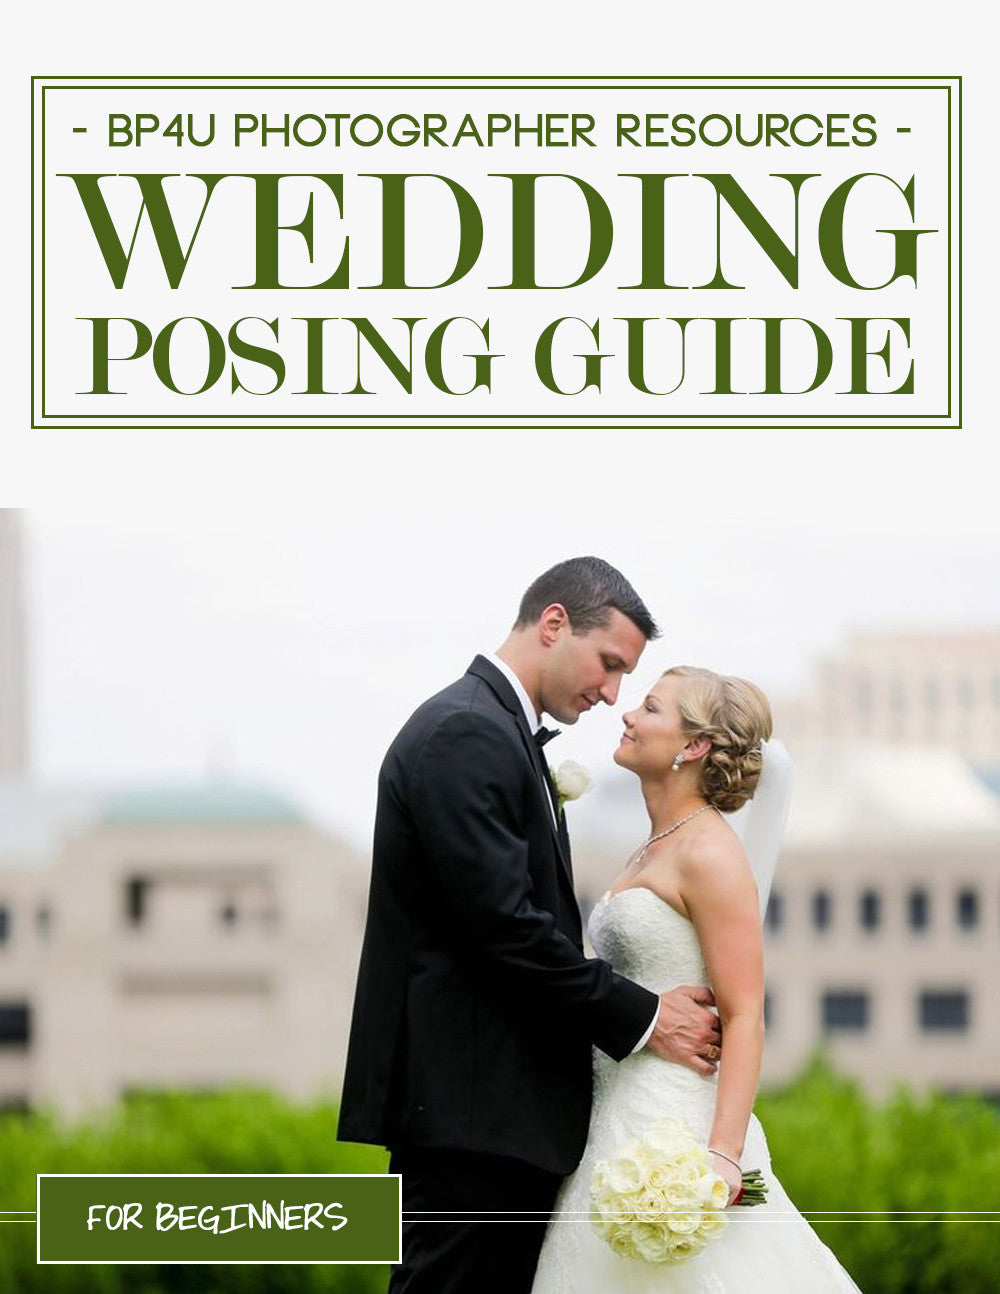 Pre-wedding Photoshoot Guide, Checklist & Tips - The Wed Cafe